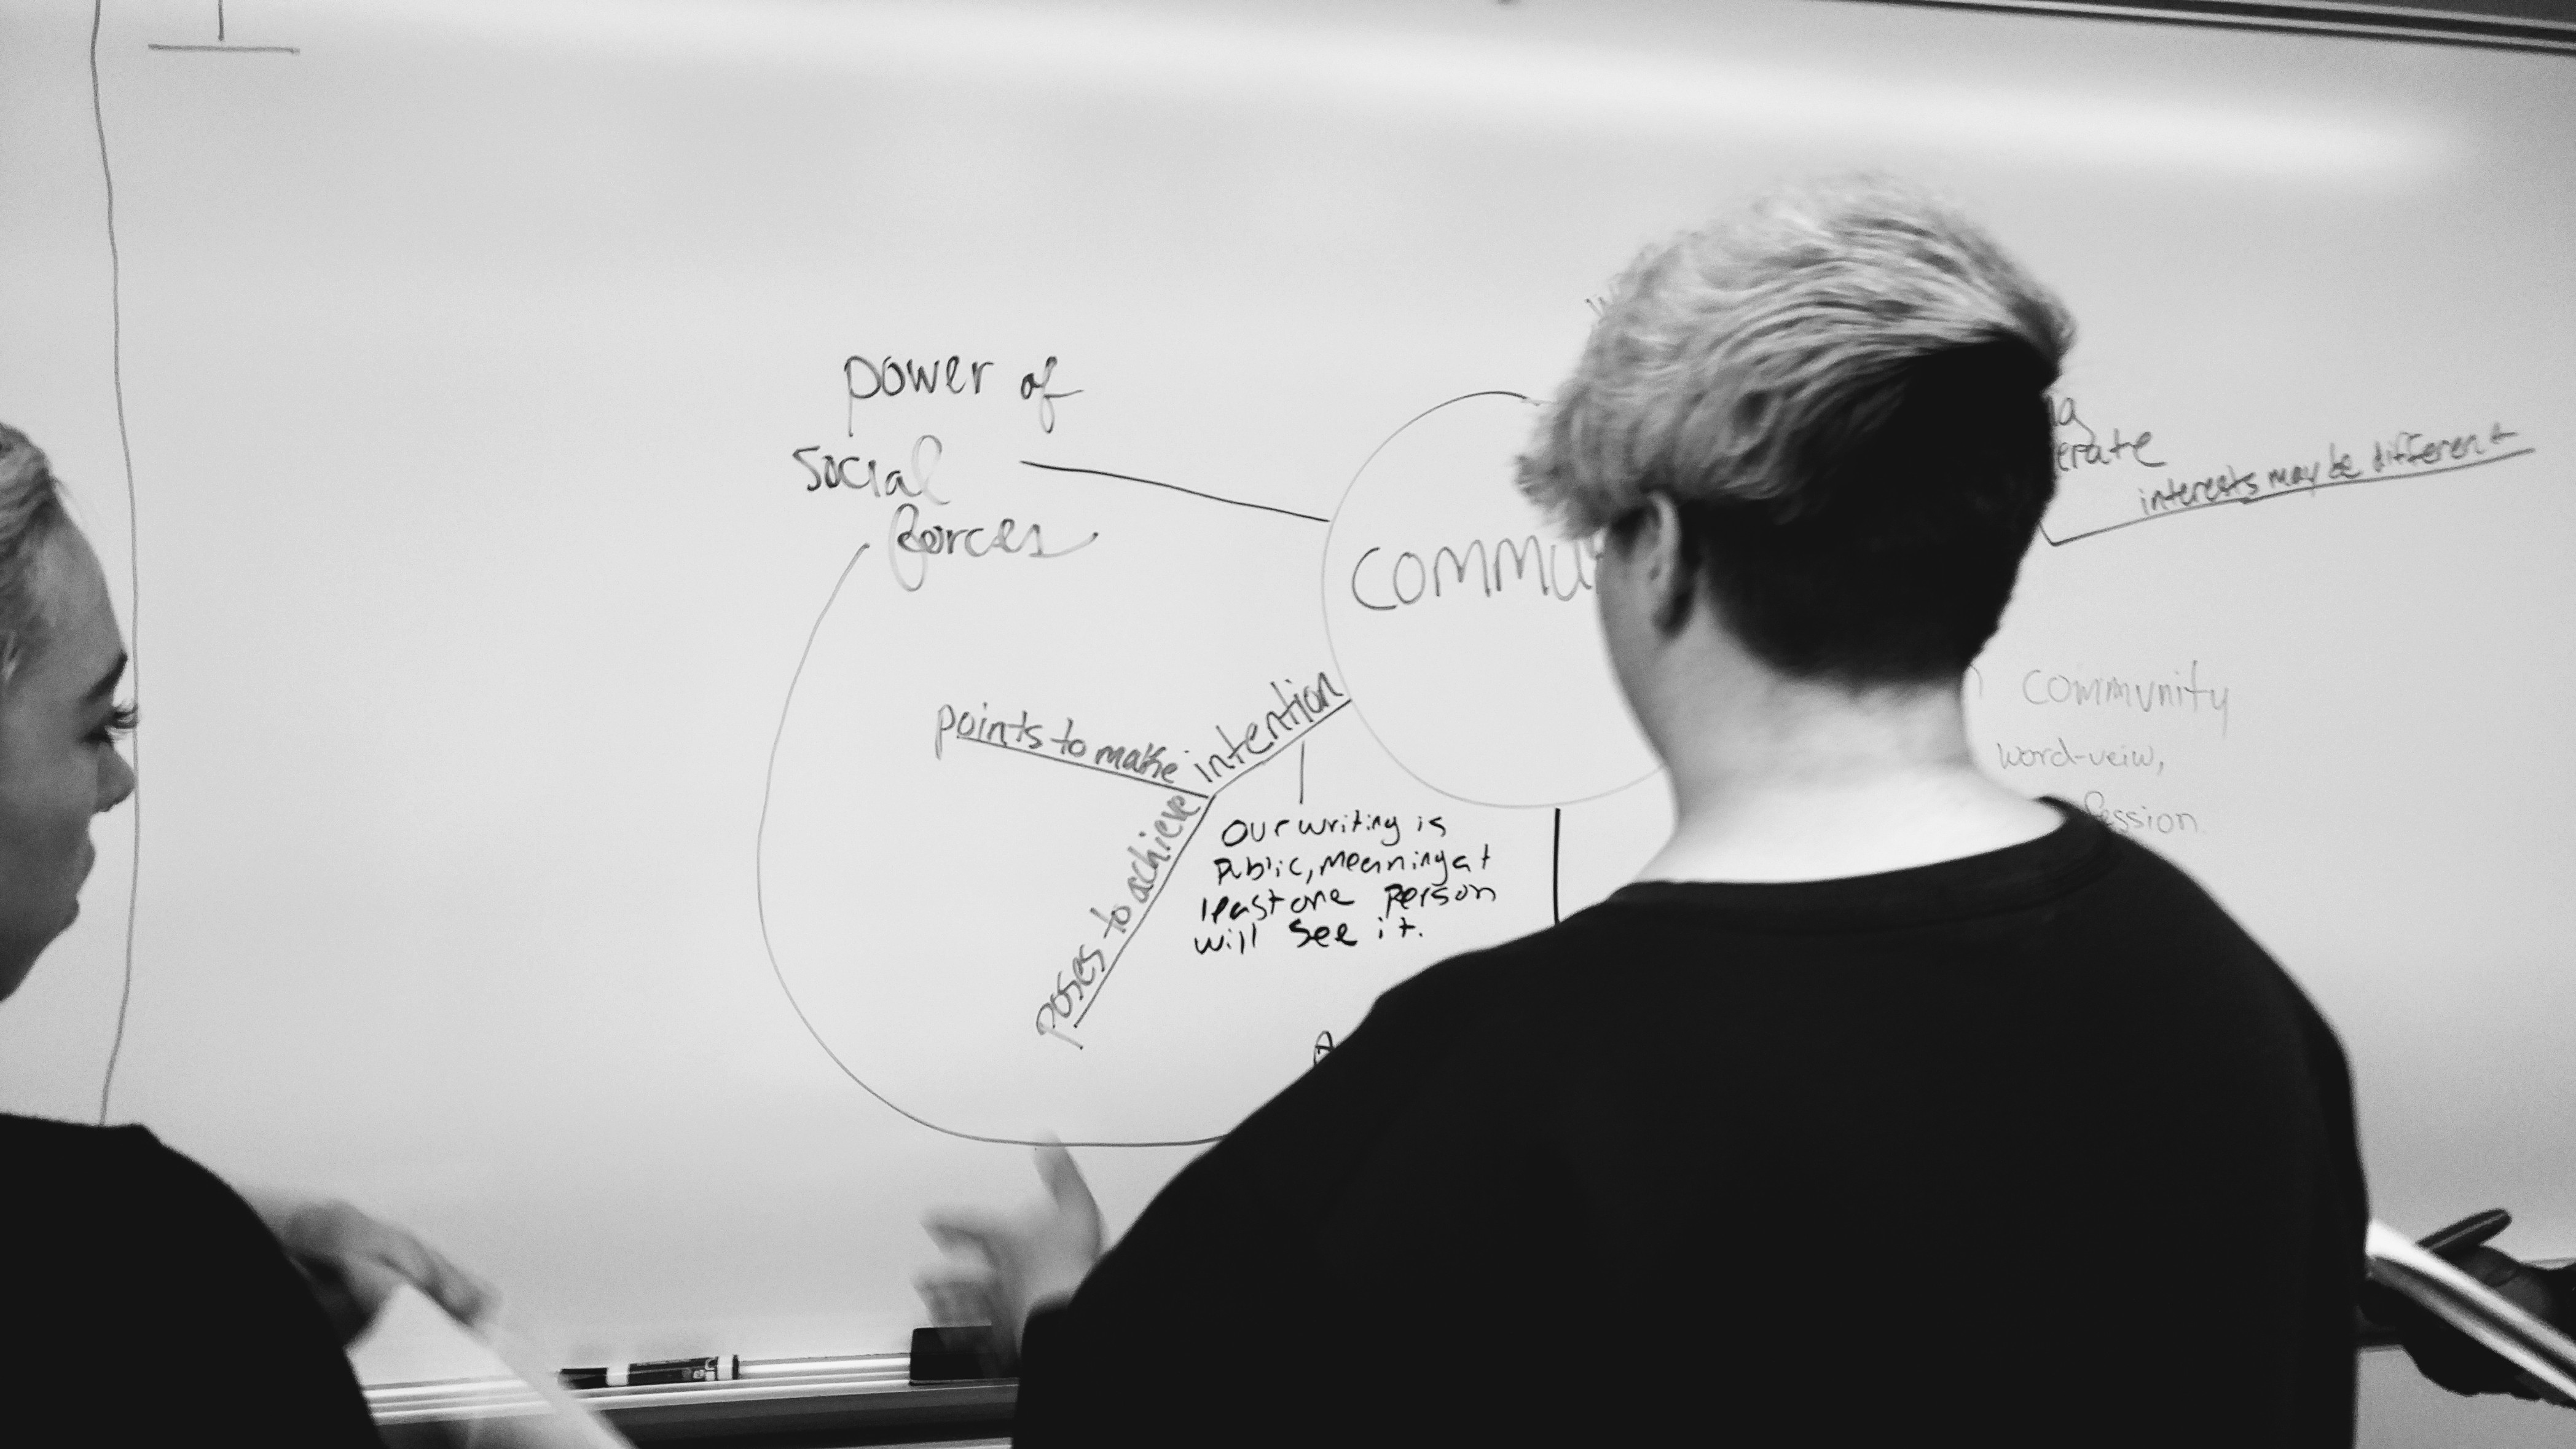 Students creating a mind-map on a white board